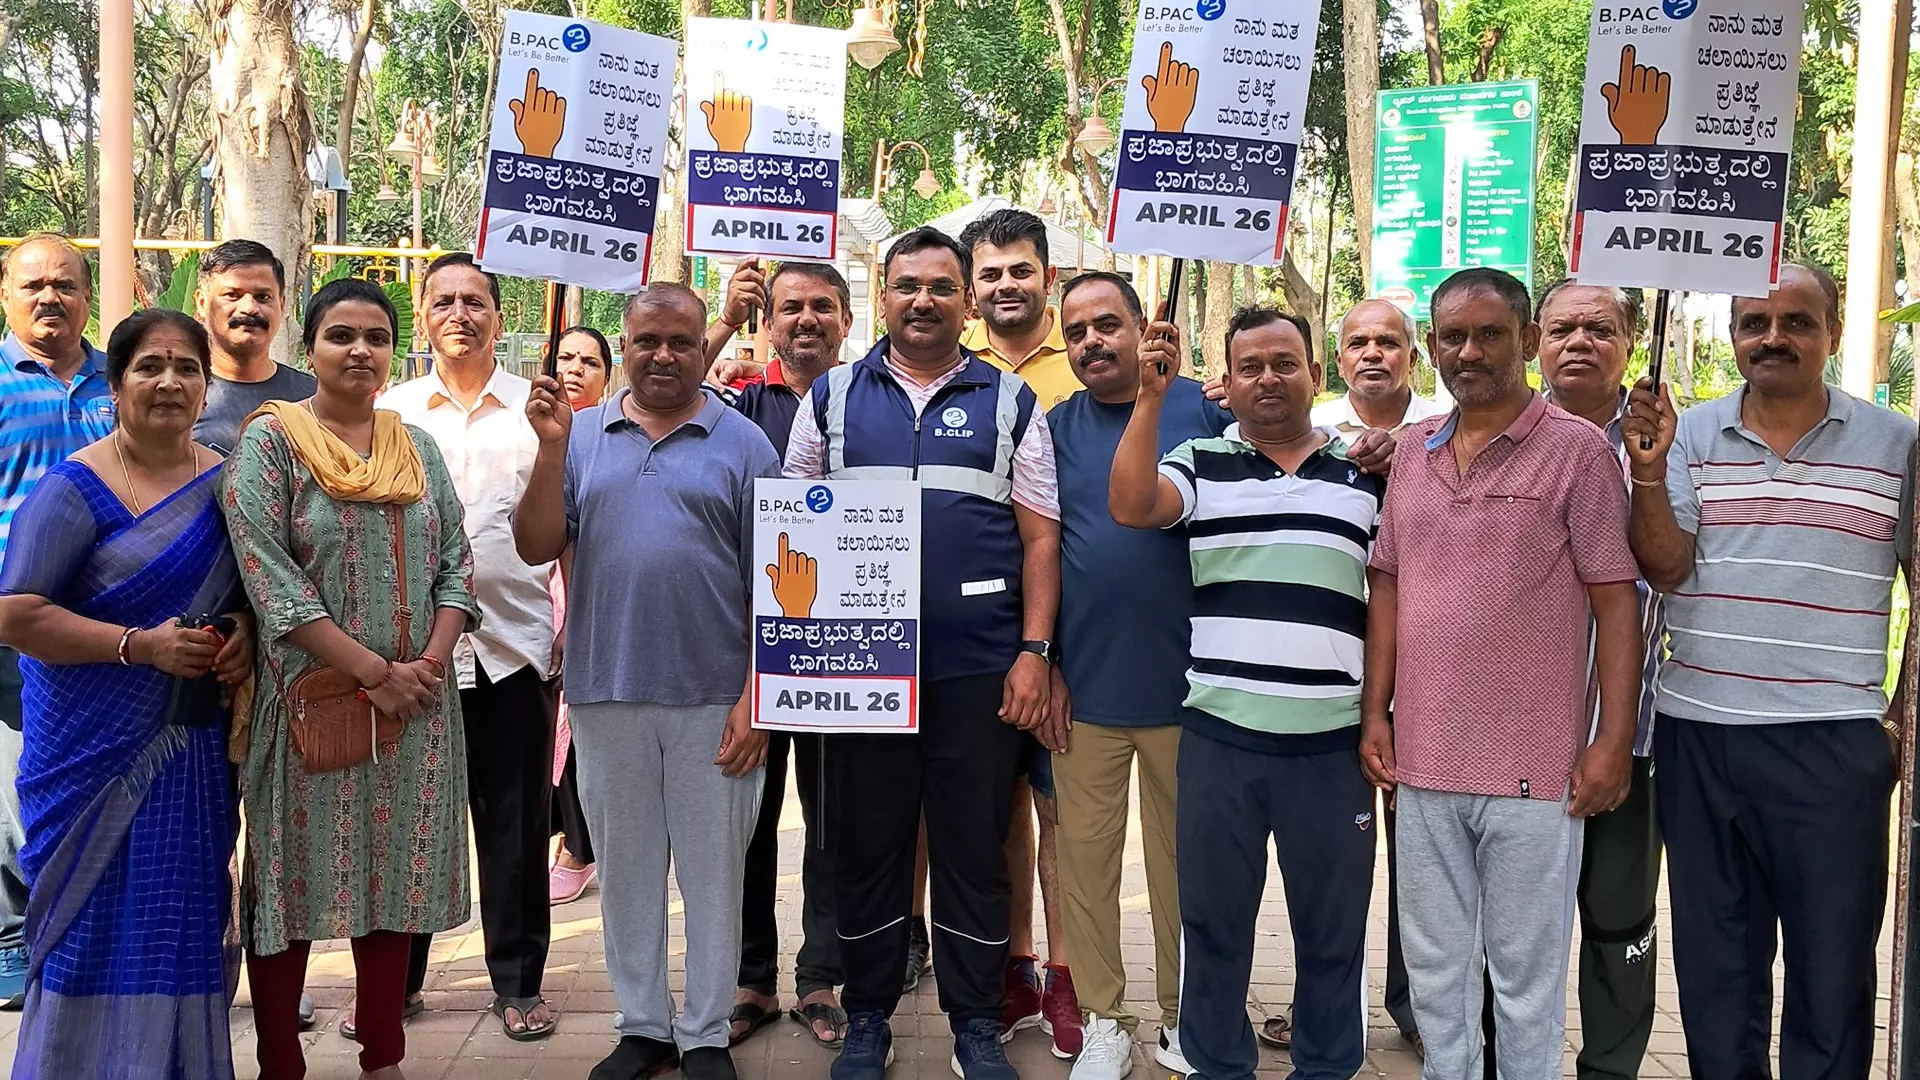 A voter awareness campaign by B.PAC in Bengaluru on April 7 (Sunday). Photo: B.PAC